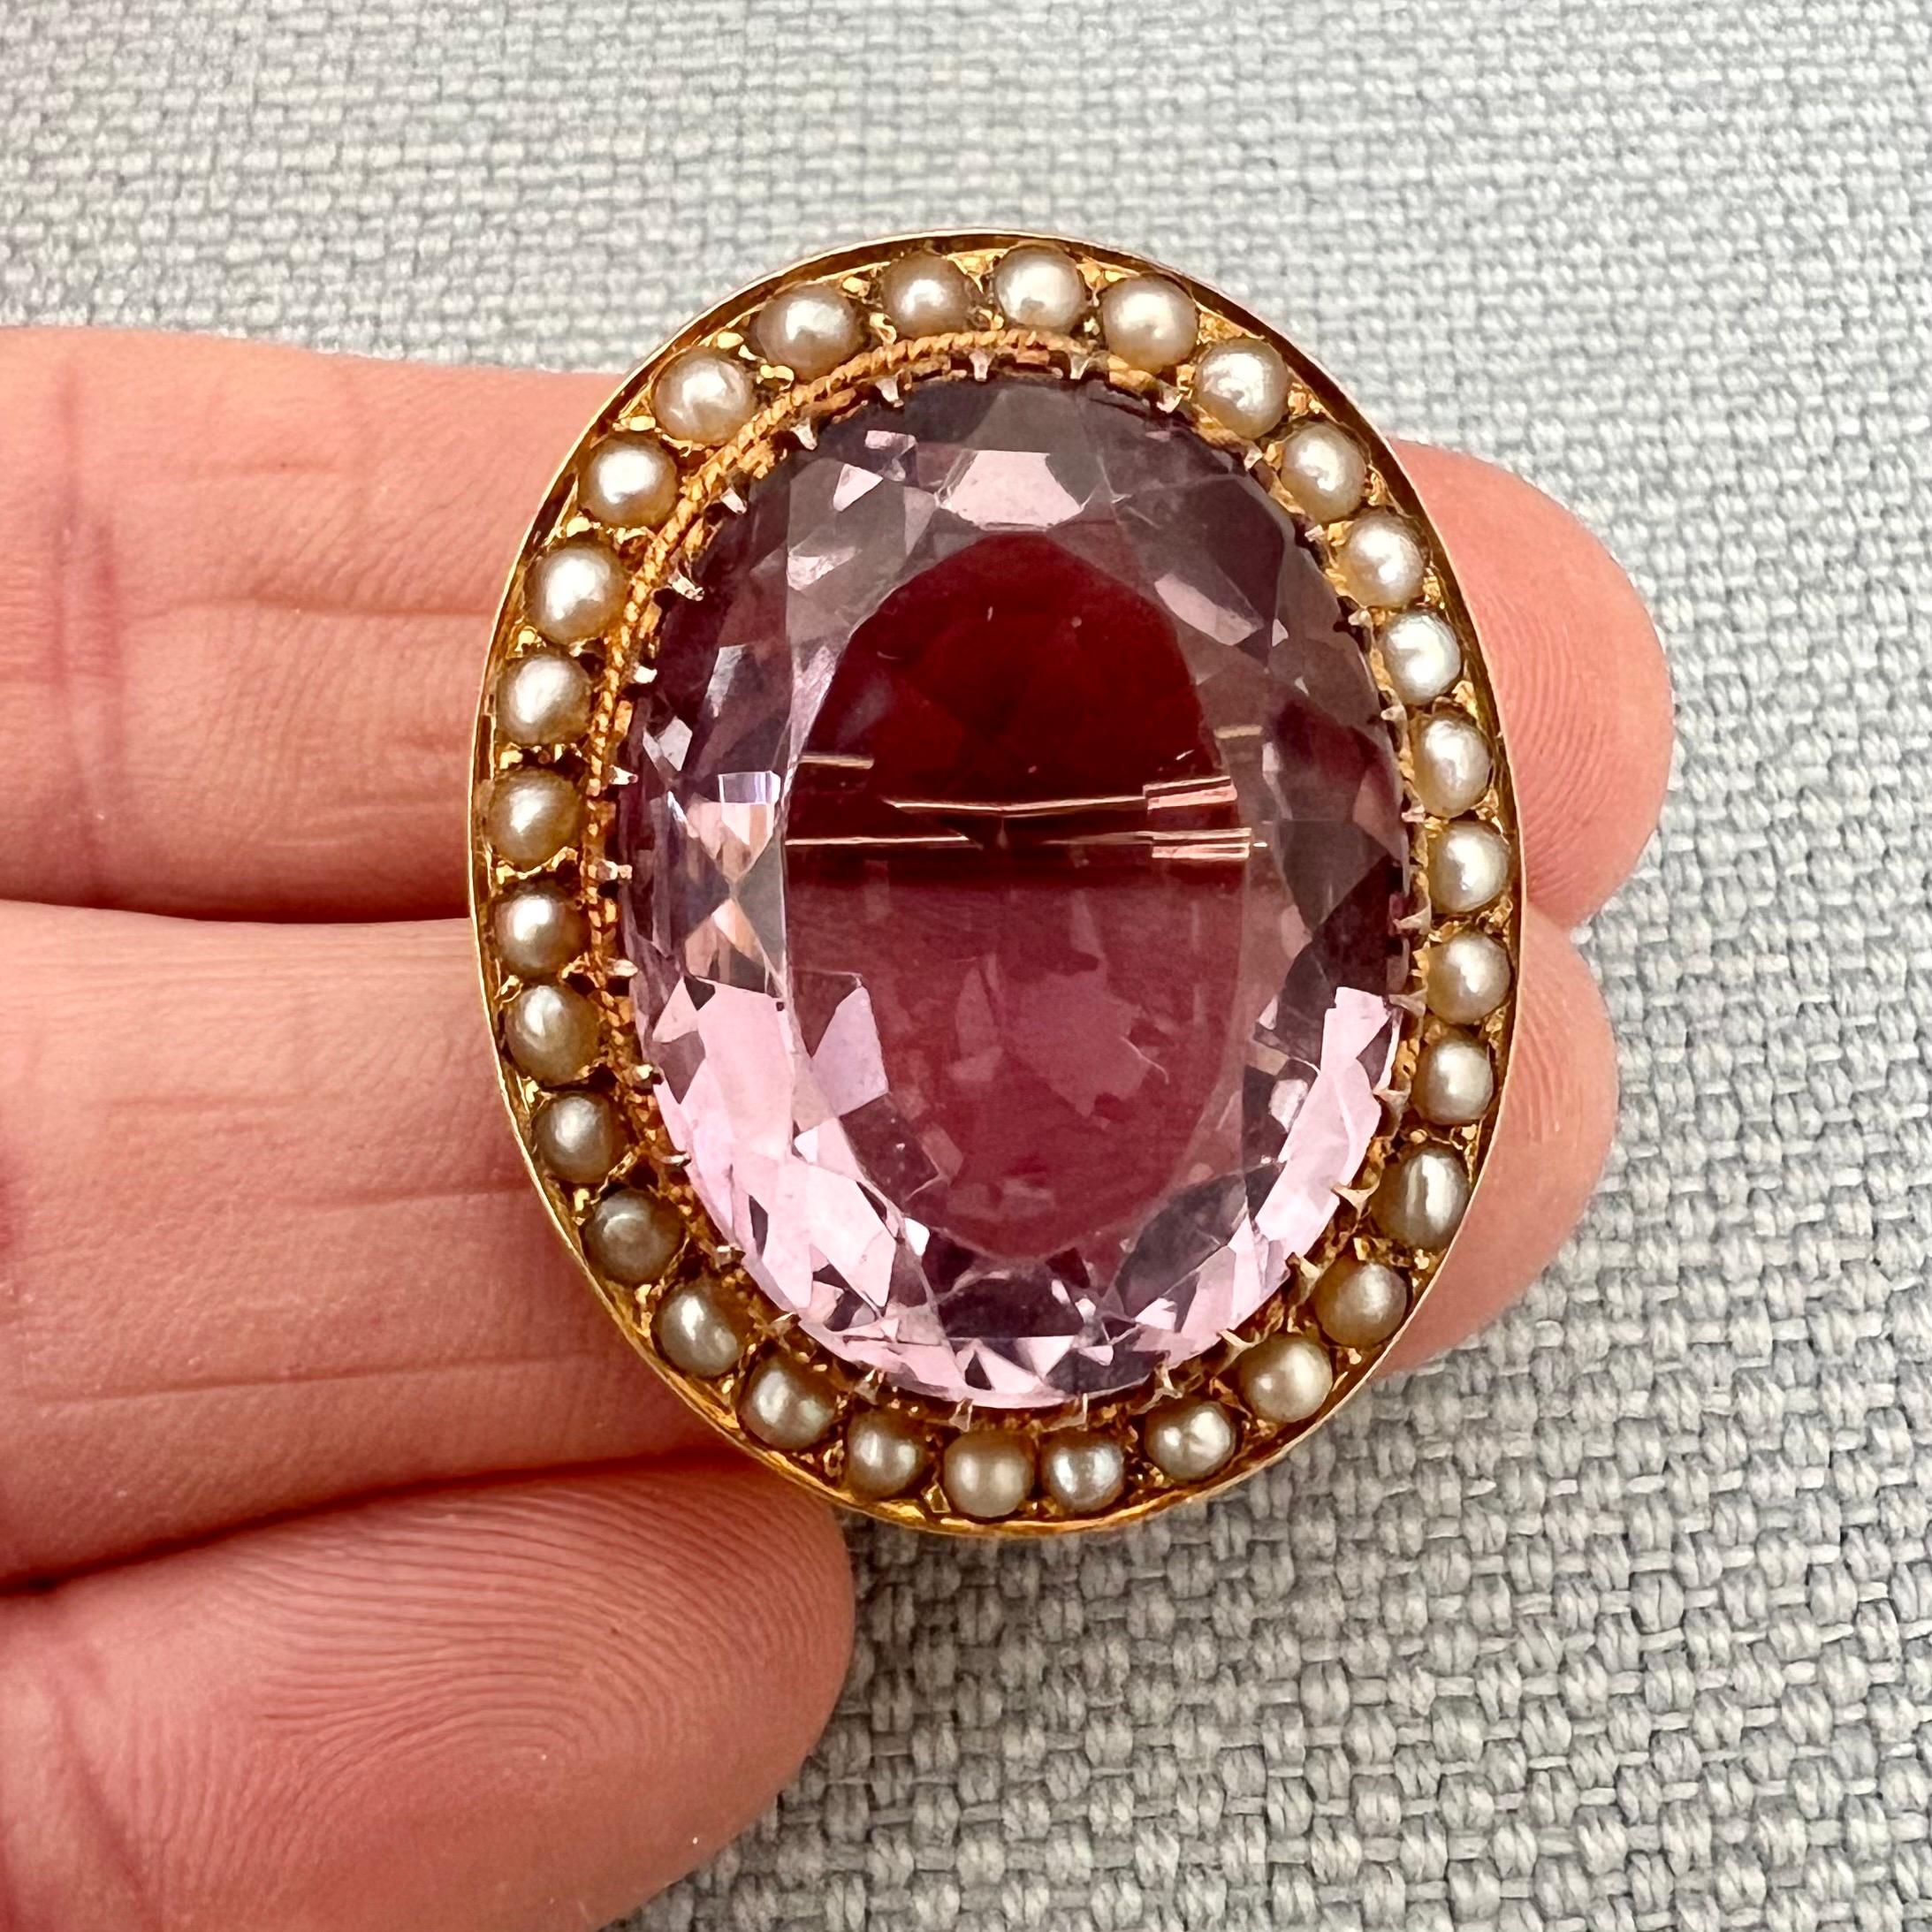 This antique late 19th century oval shaped openwork brooch is created with a large faceted amethyst. The amethyst is brilliant cut, translucent and has a beautiful purple levender color. Thirty creamy white seed pearls are inlaid in the gold frame